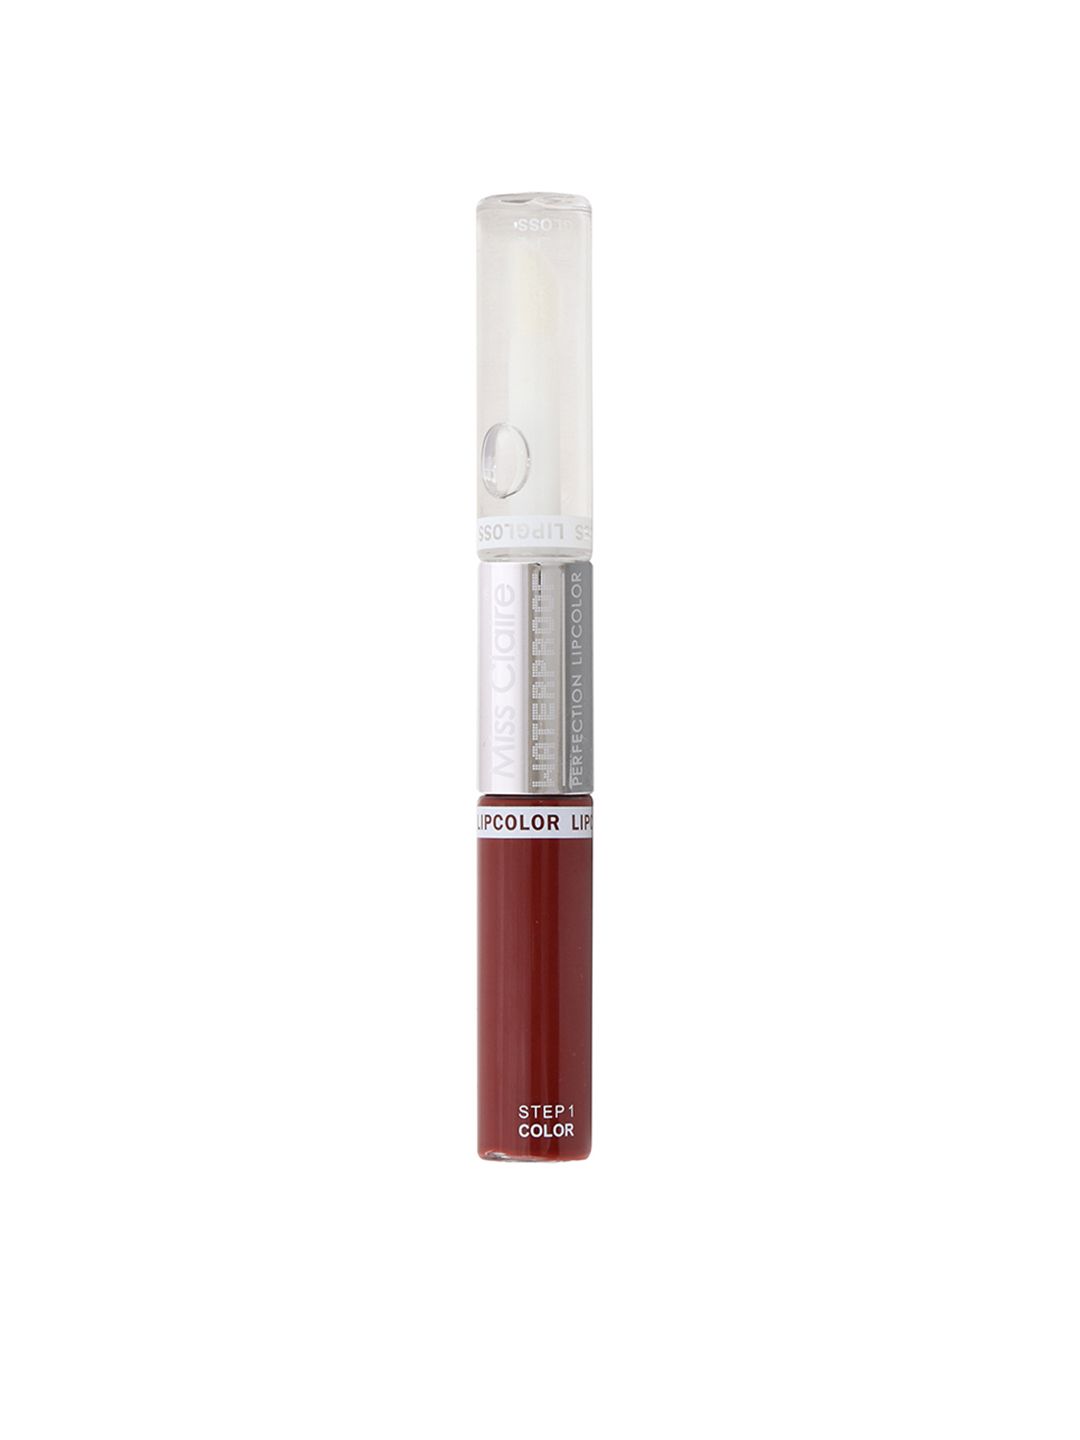 Miss Claire Waterproof Perfection Lip Color + Lip Gloss - 01 Price in India